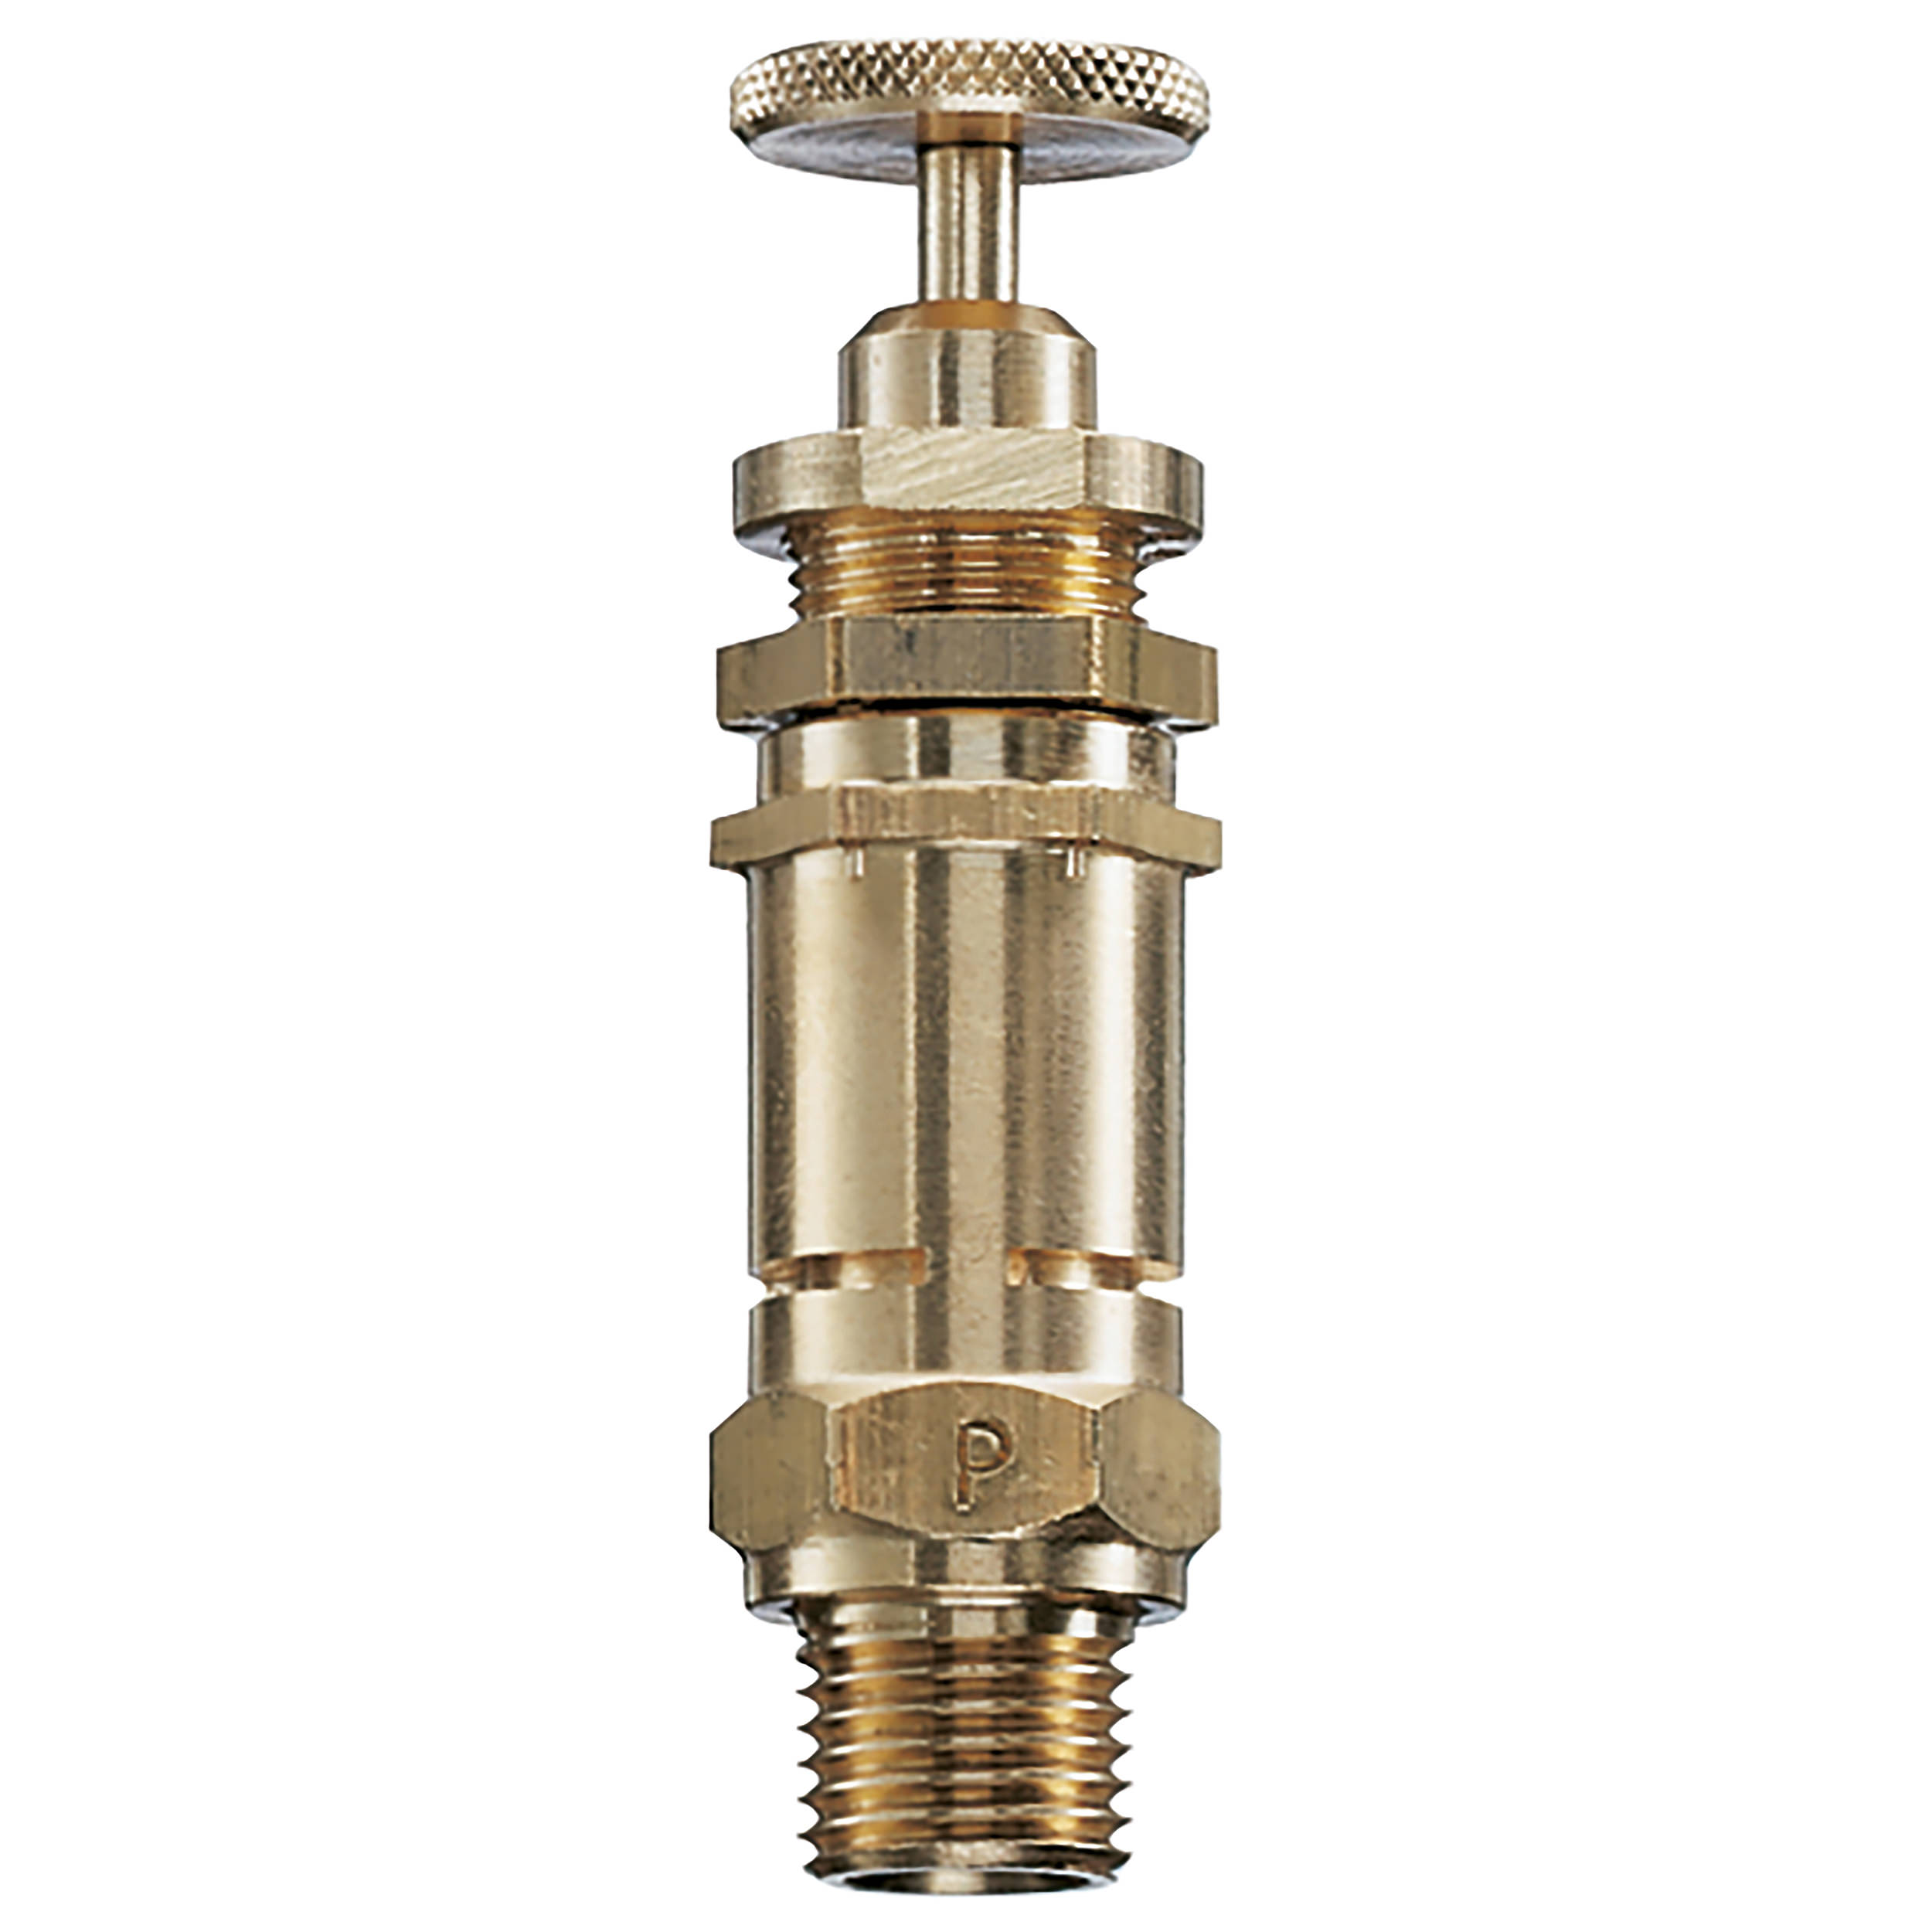 Blow-off valve DN 6, G ¼, set pressure: 10.9 bar (158 psi), seal: metal, not component tested